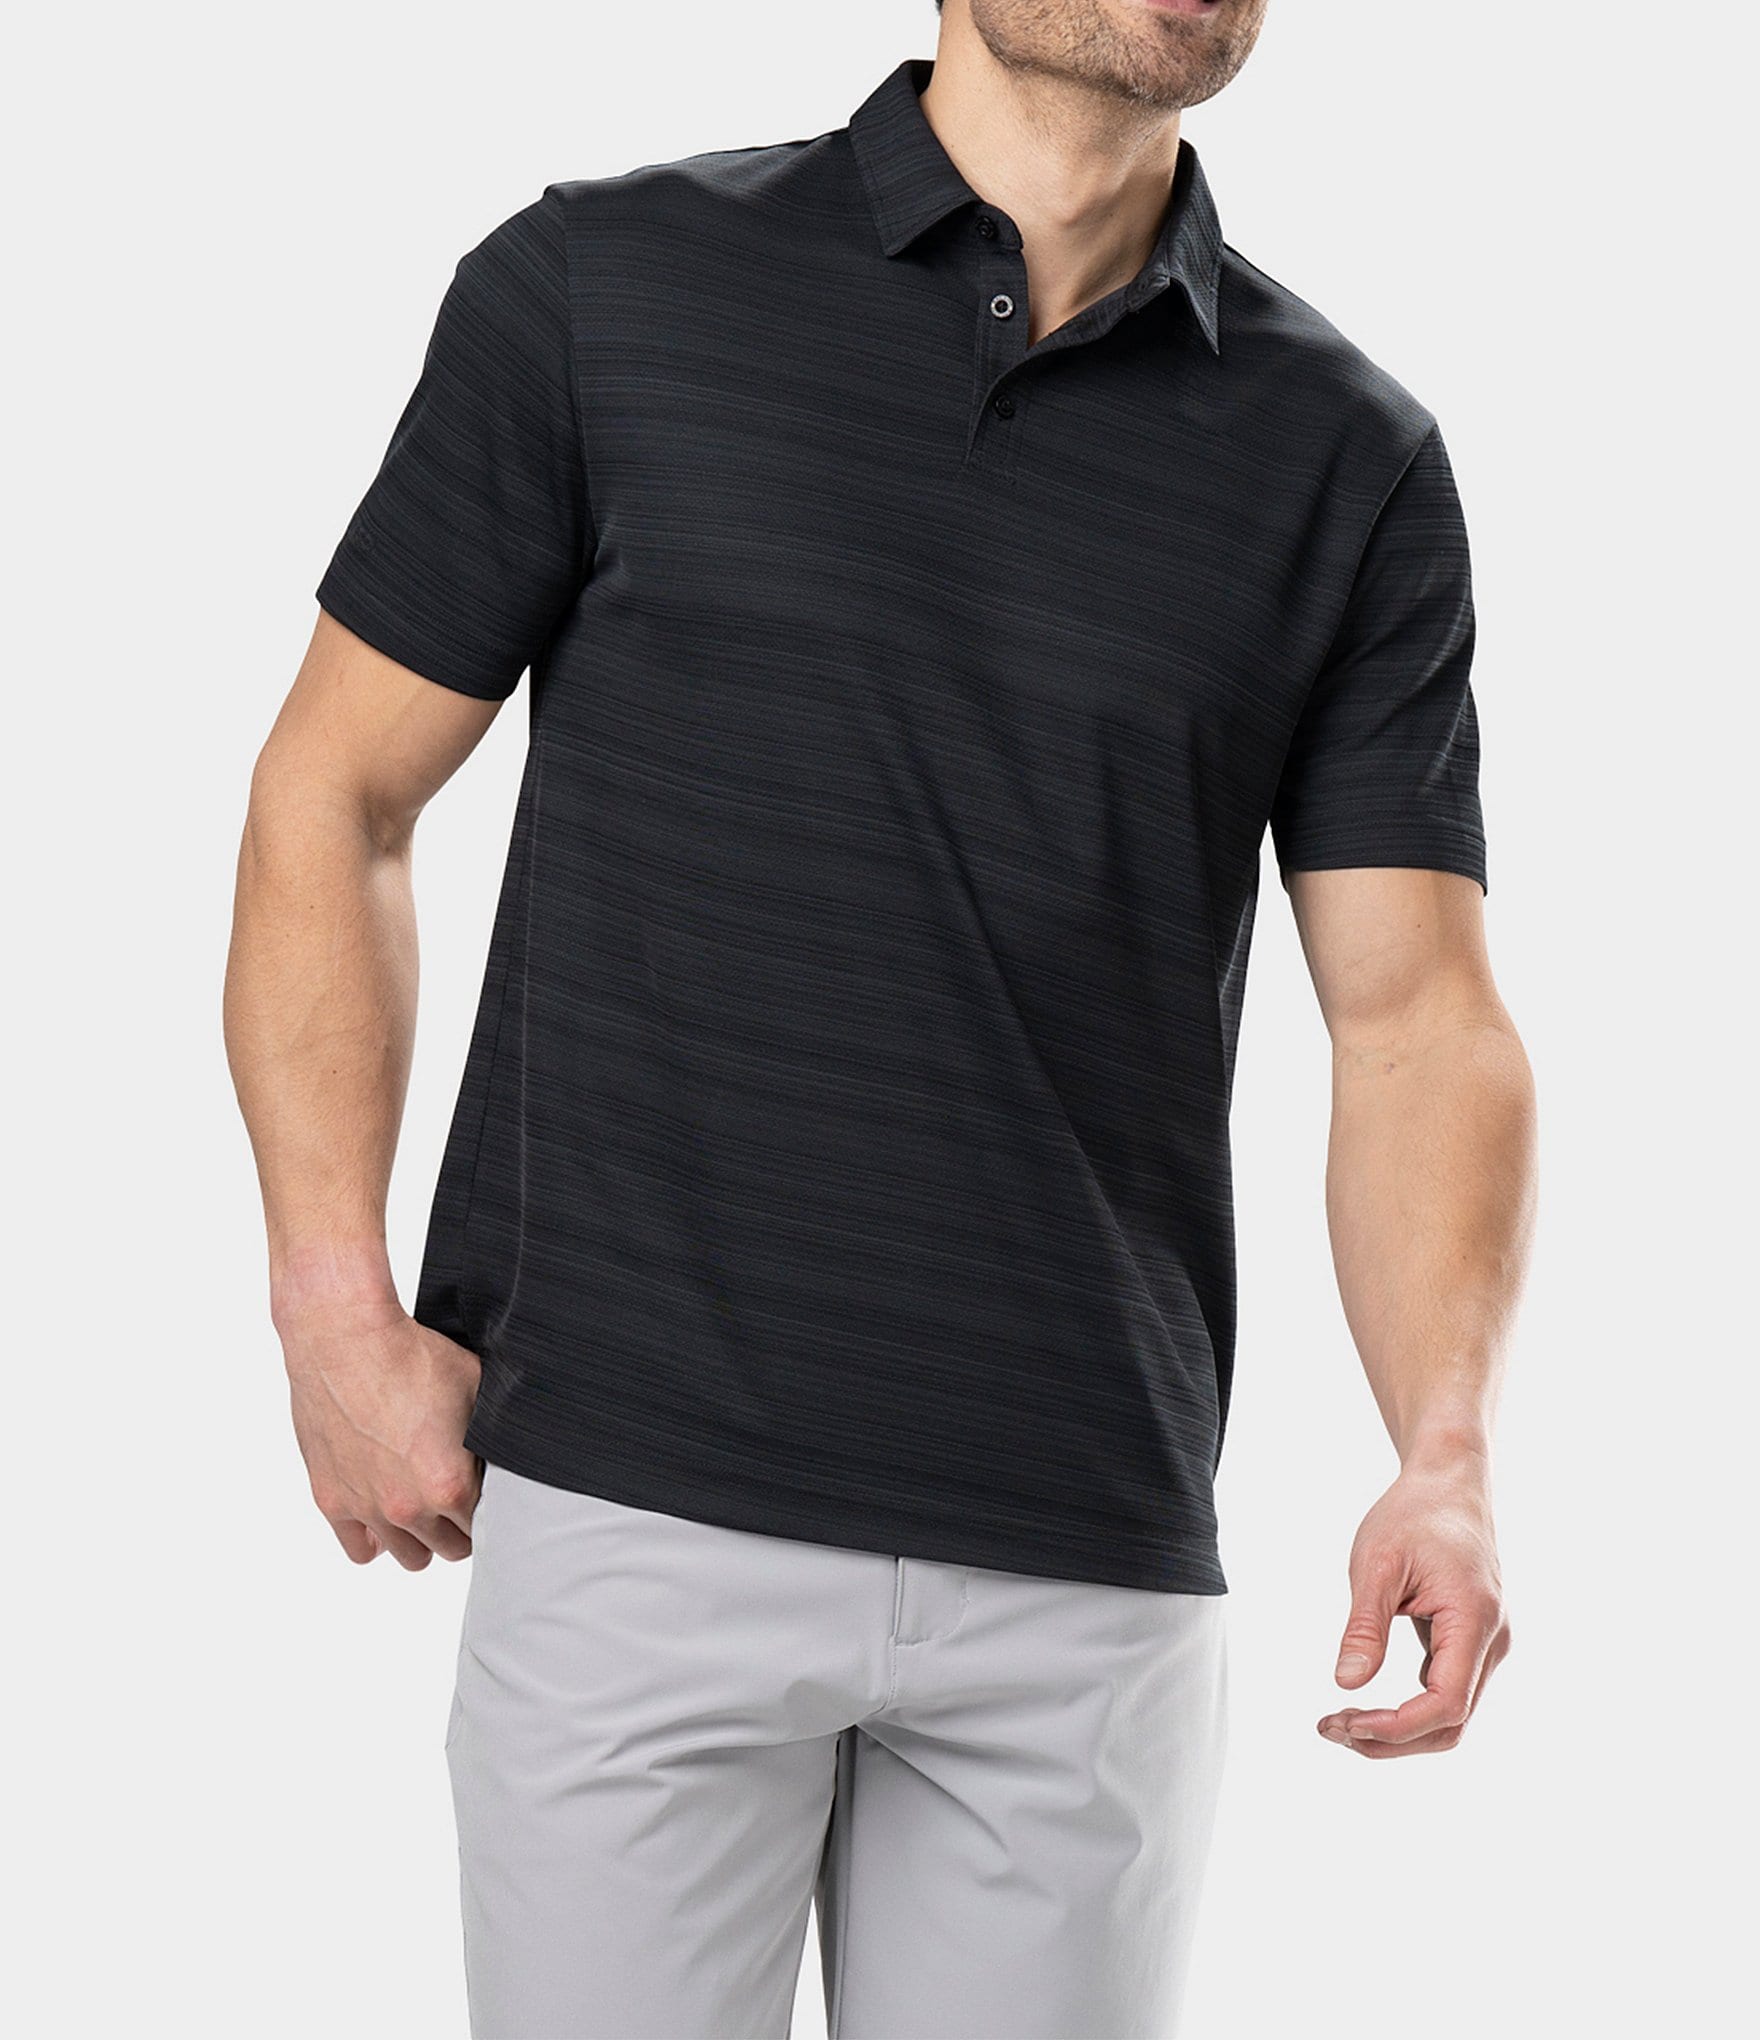 BLACK CLOVER Short Sleeve Square Printed Athletic Knit Polo Shirt